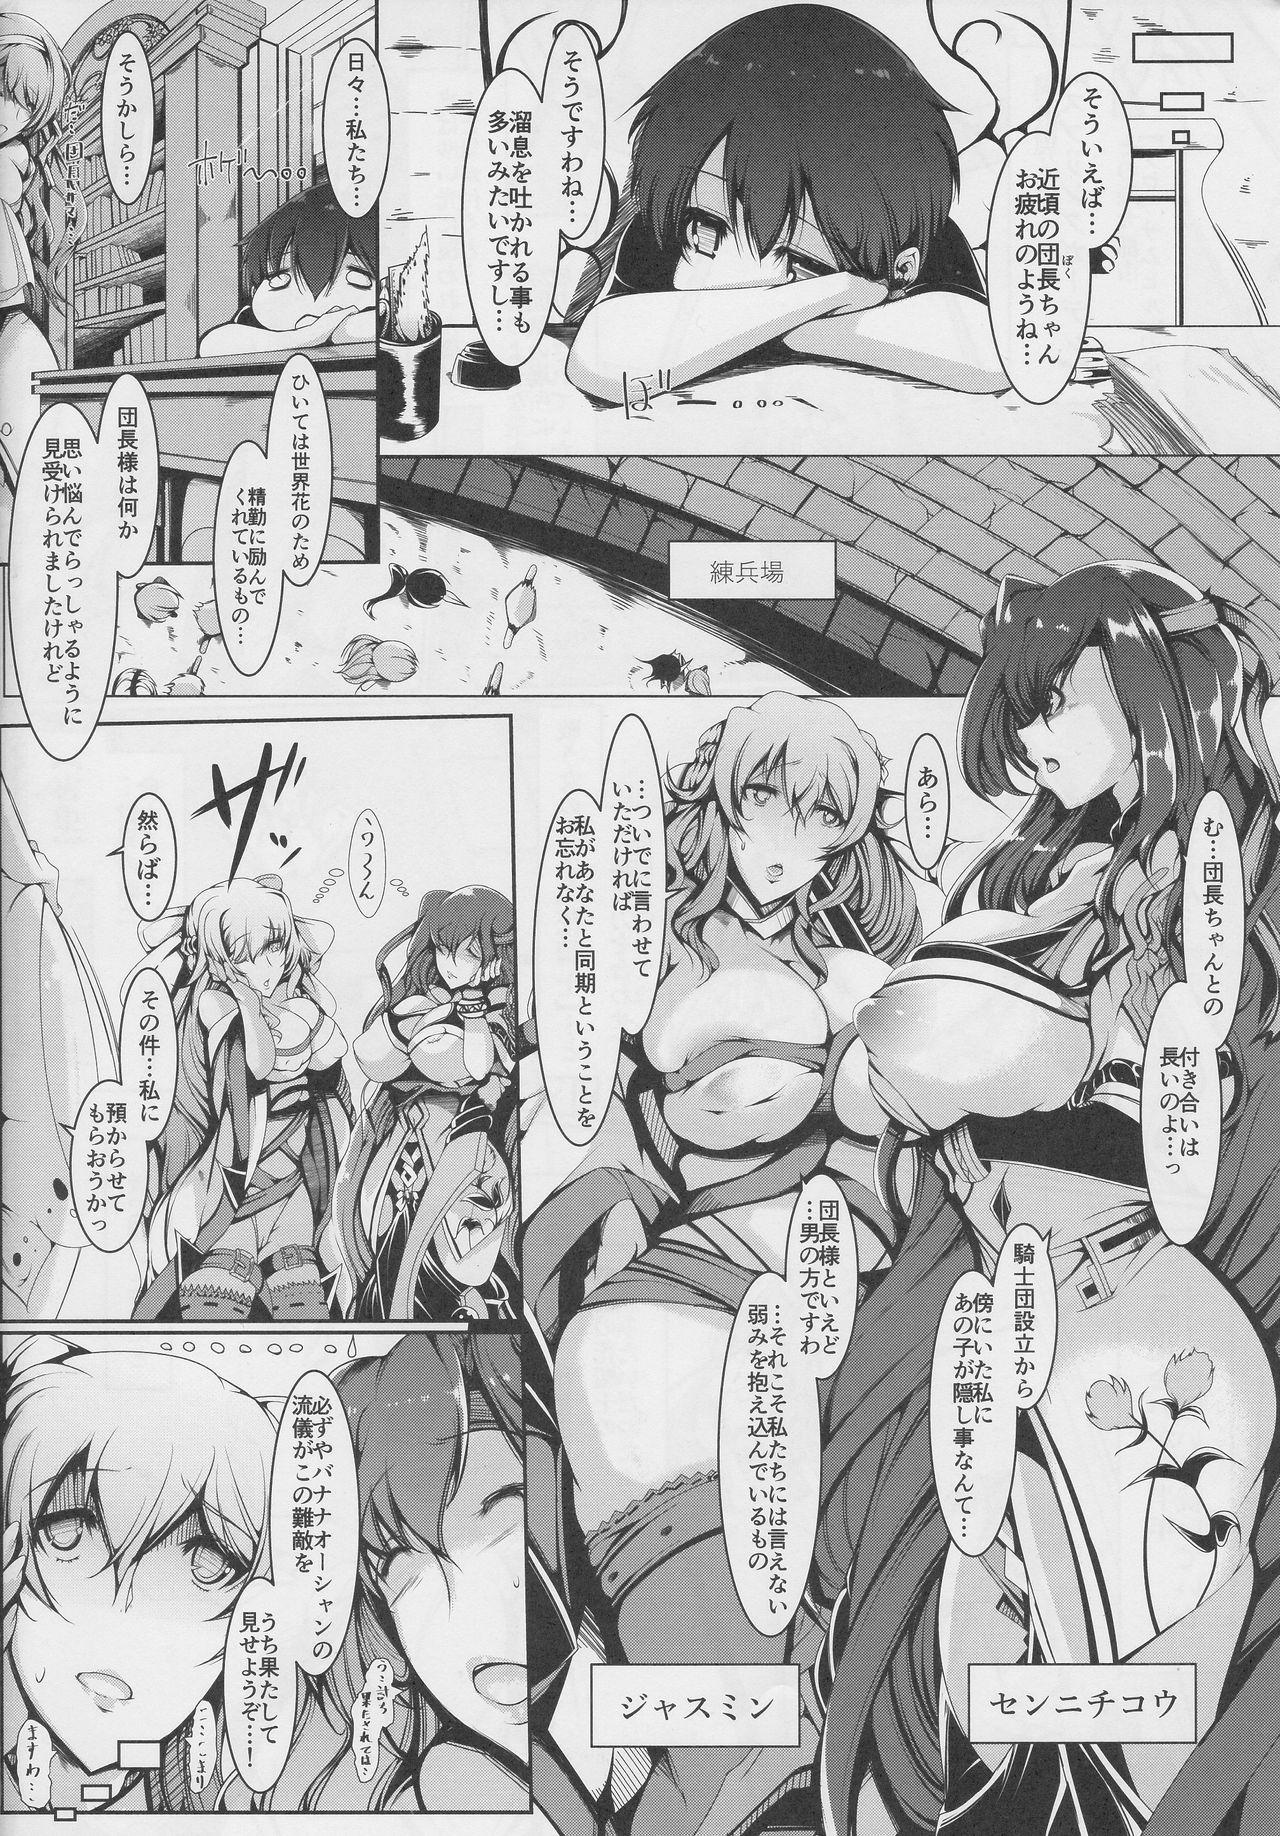 Weird Banana&Winter Wars - Flower knight girl Old Vs Young - Page 4